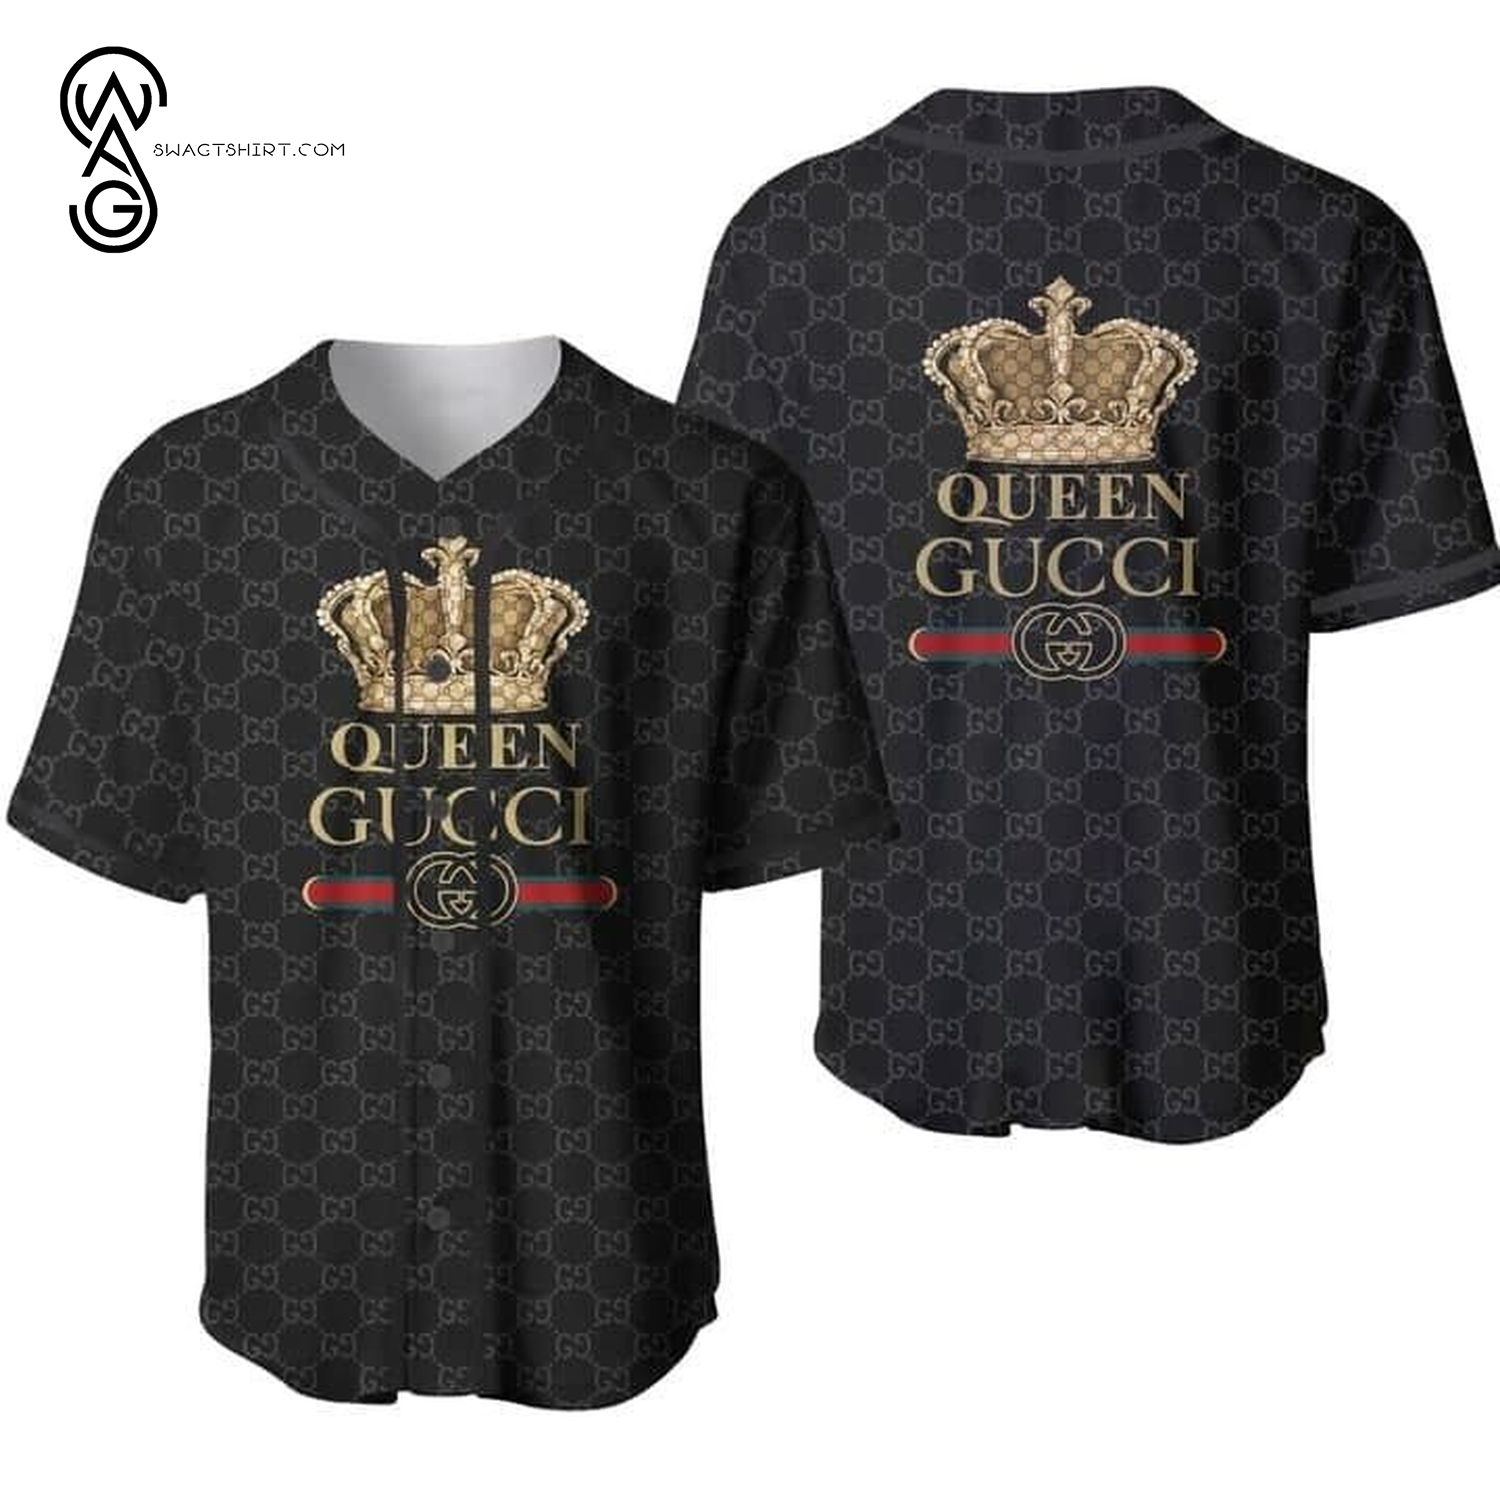 Queen Gucci Full Printed Baseball Jersey